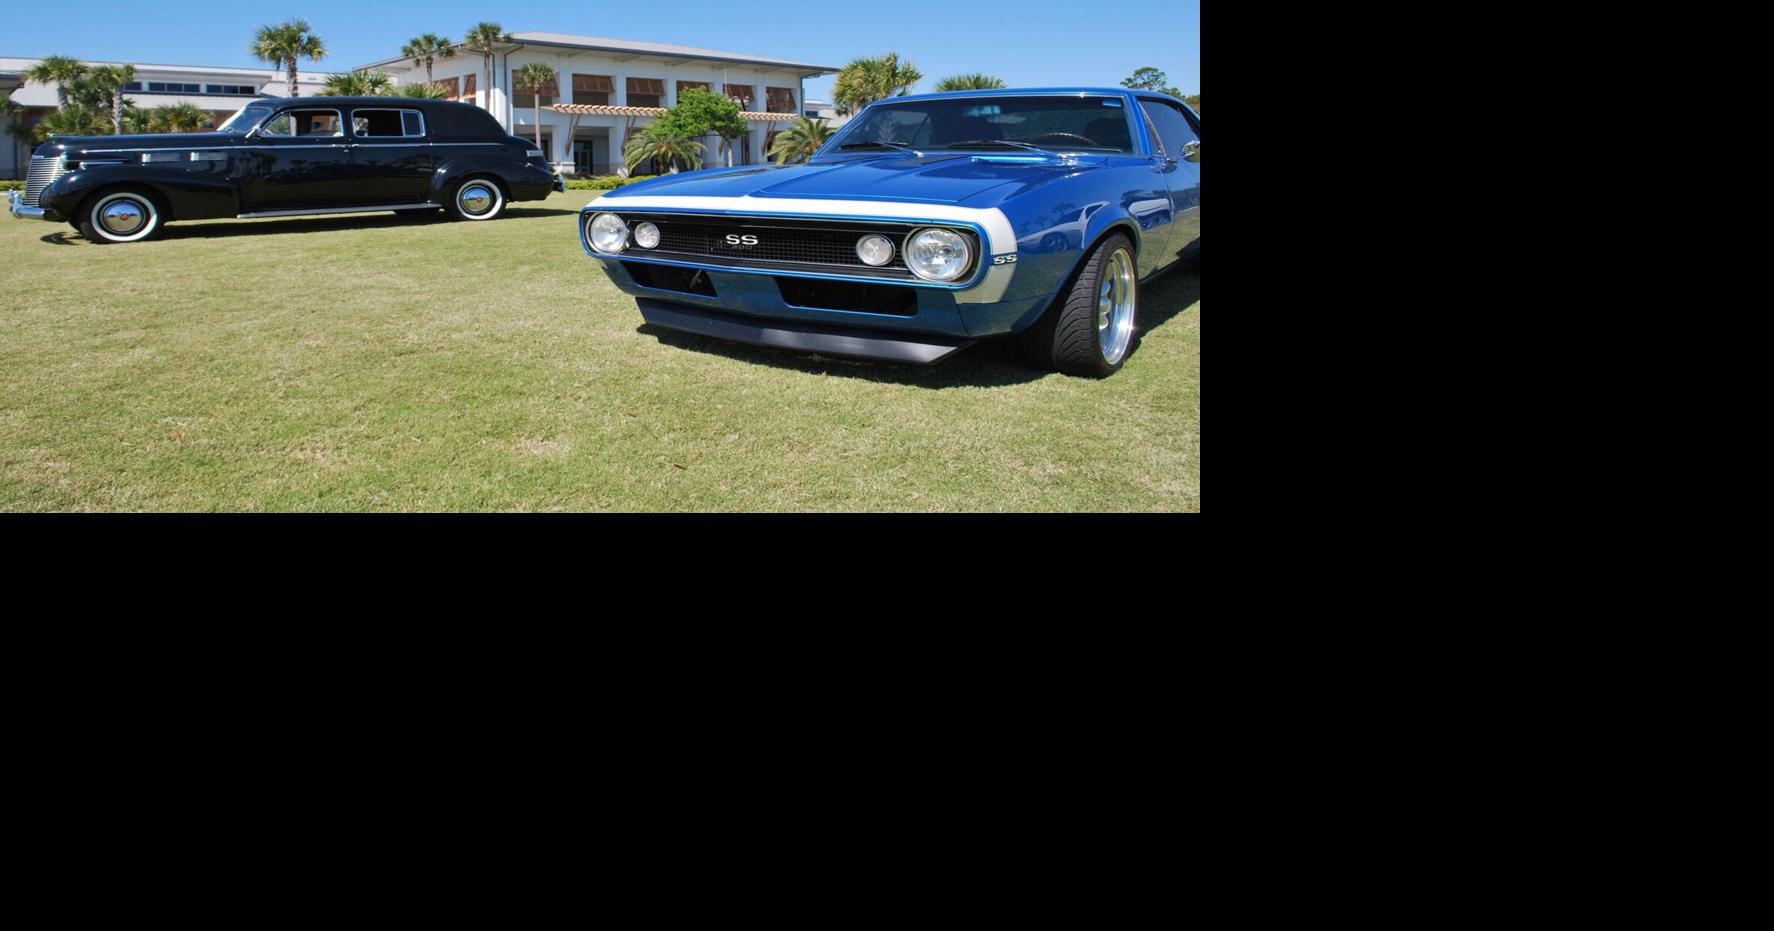 Popular car show coming to Jekyll Island in March Local News